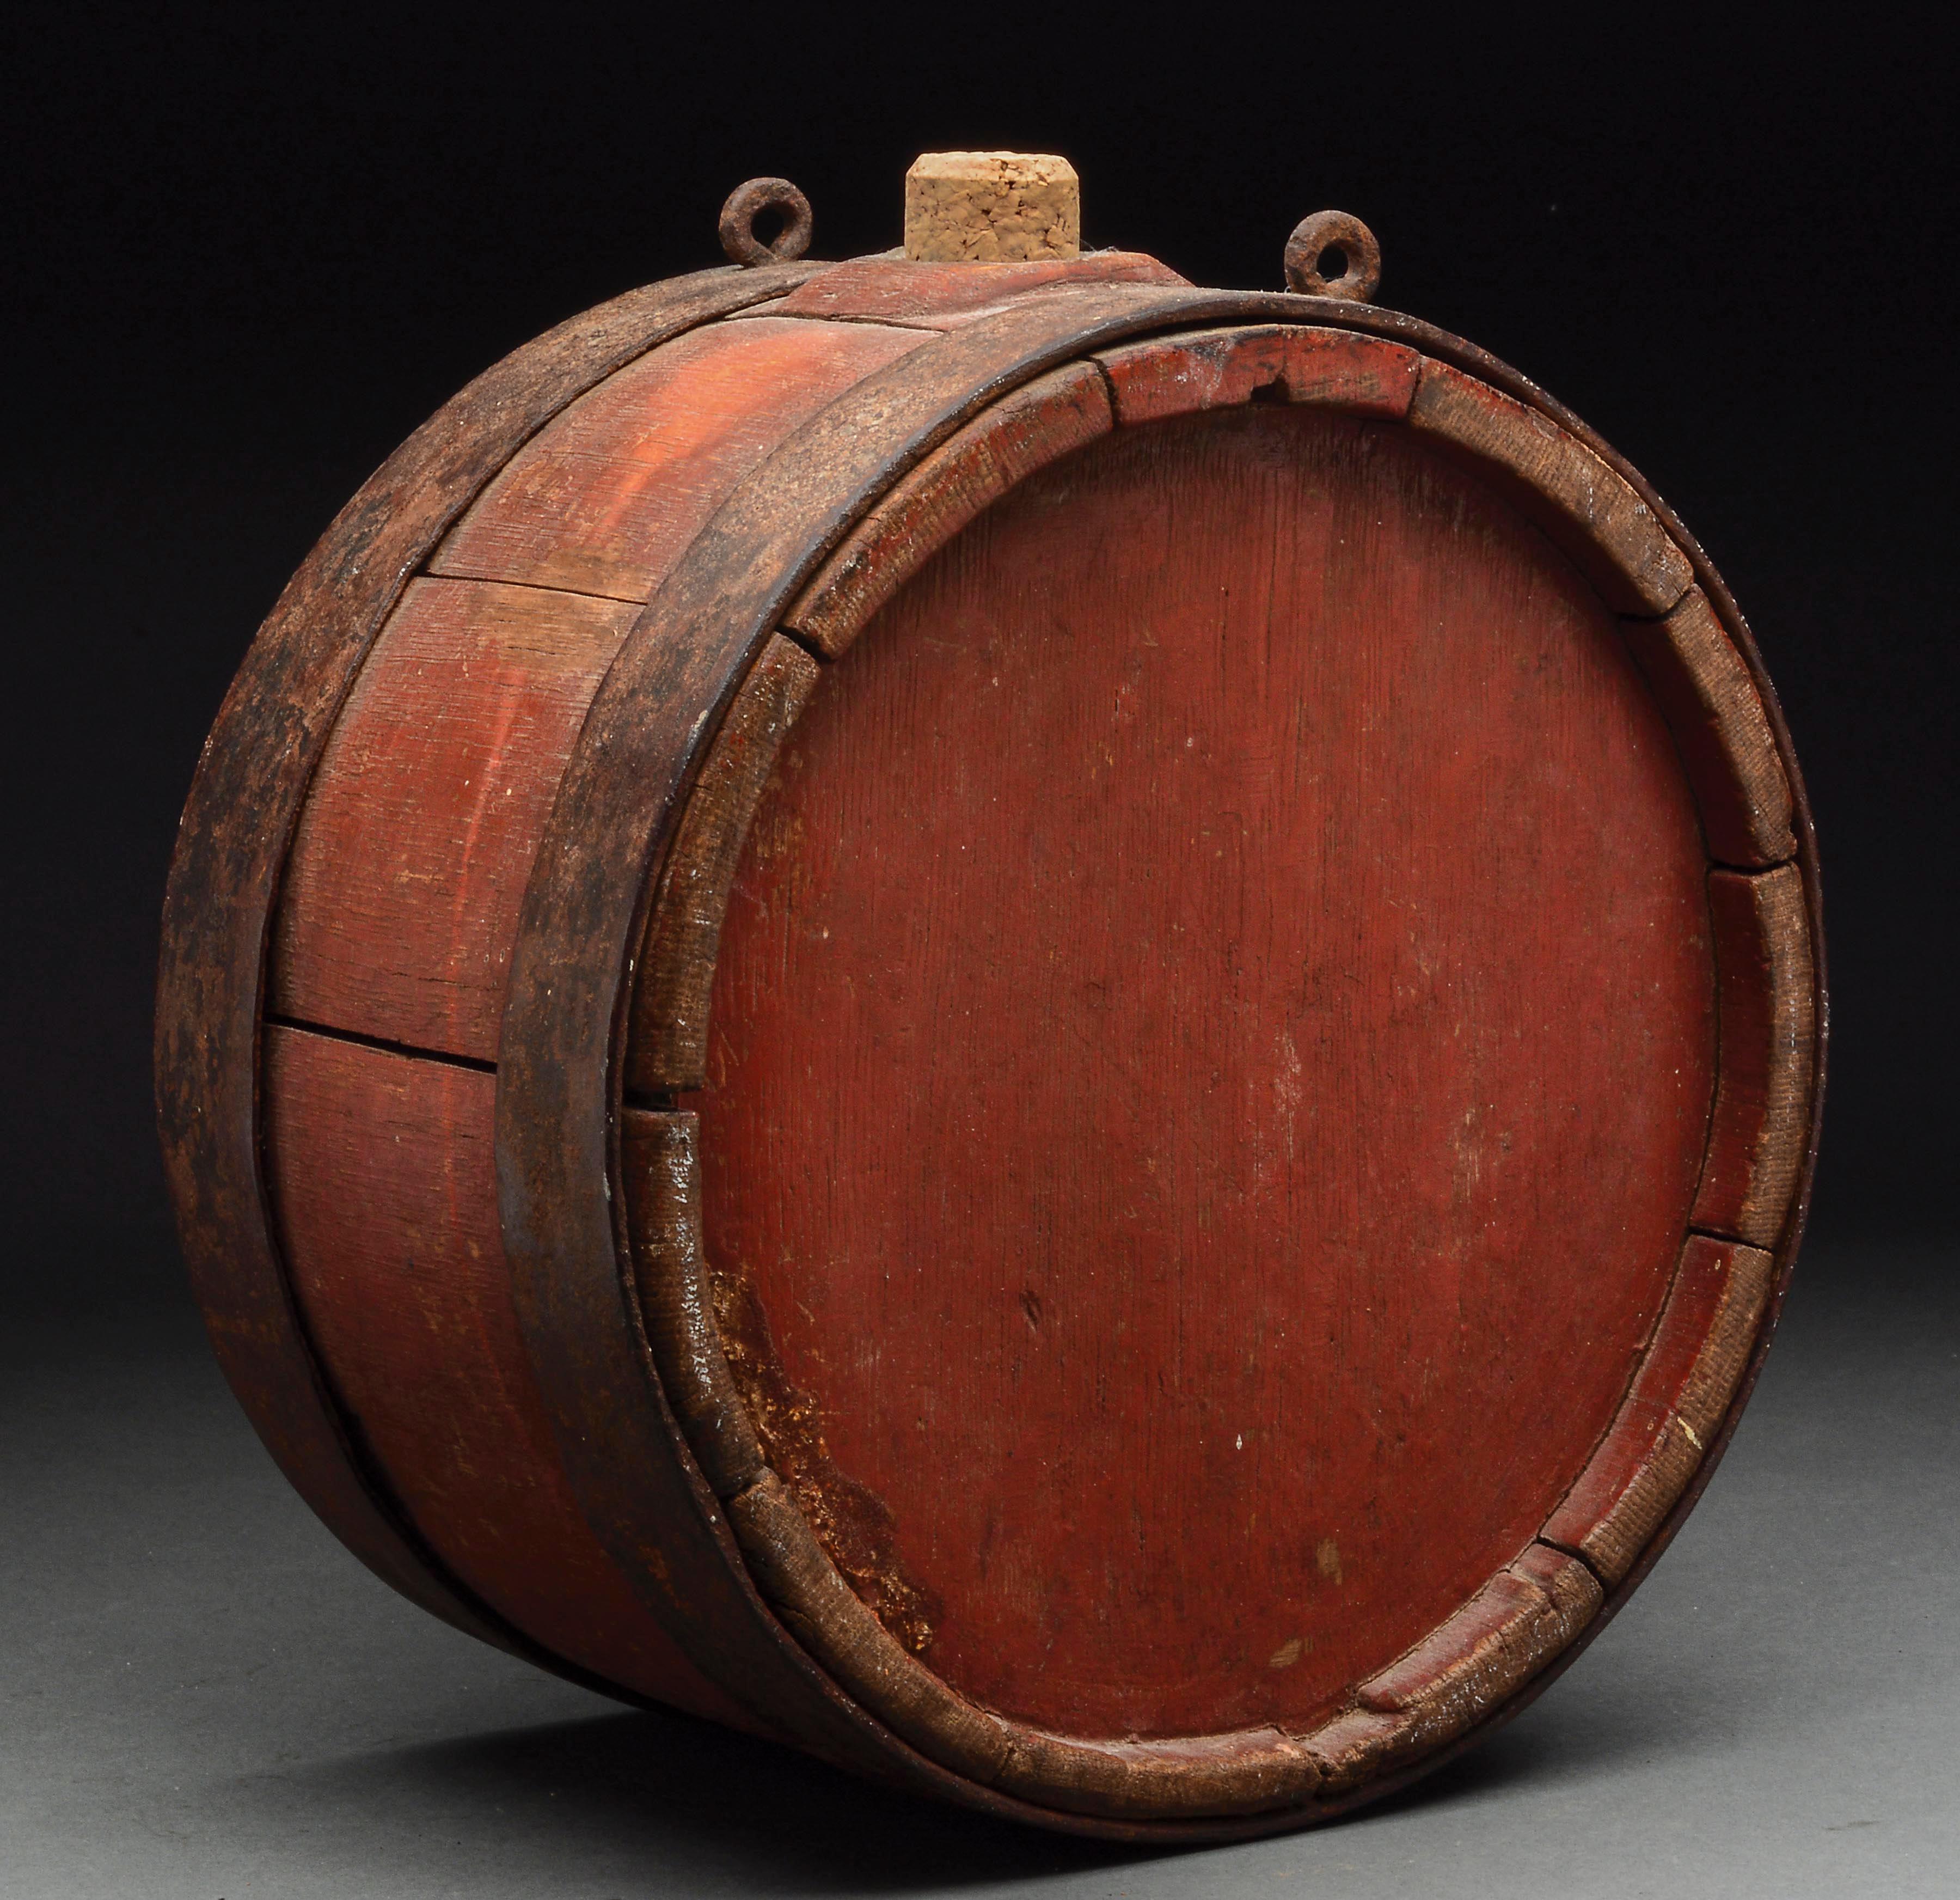 Important and Historic Documented Revolutionary War Banded Field Canteen, Dated 1774 Carried at Batt